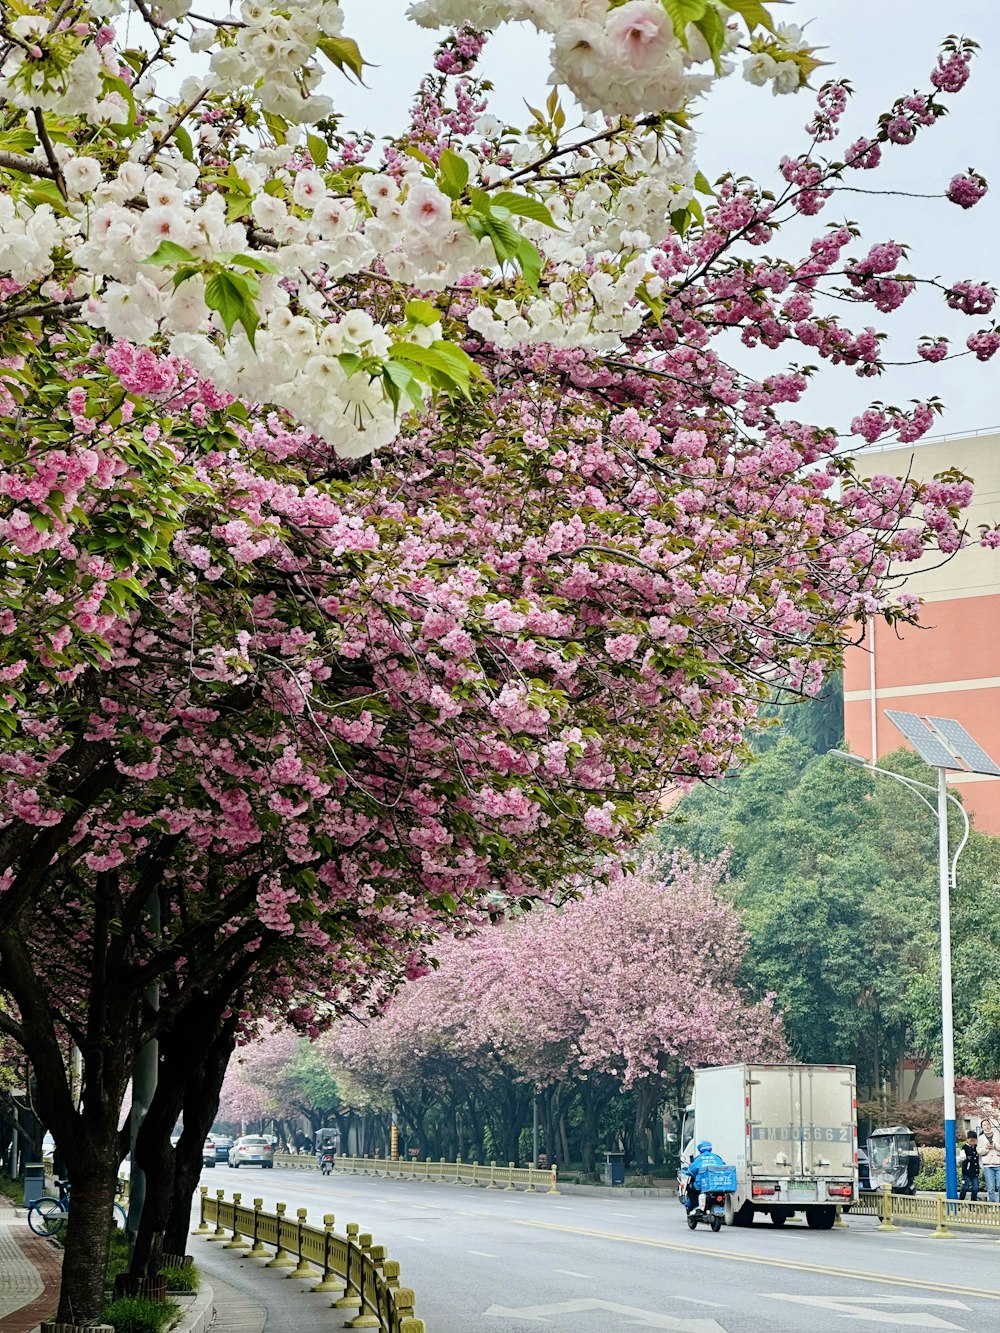 a street lined with lots of pink and white flowers